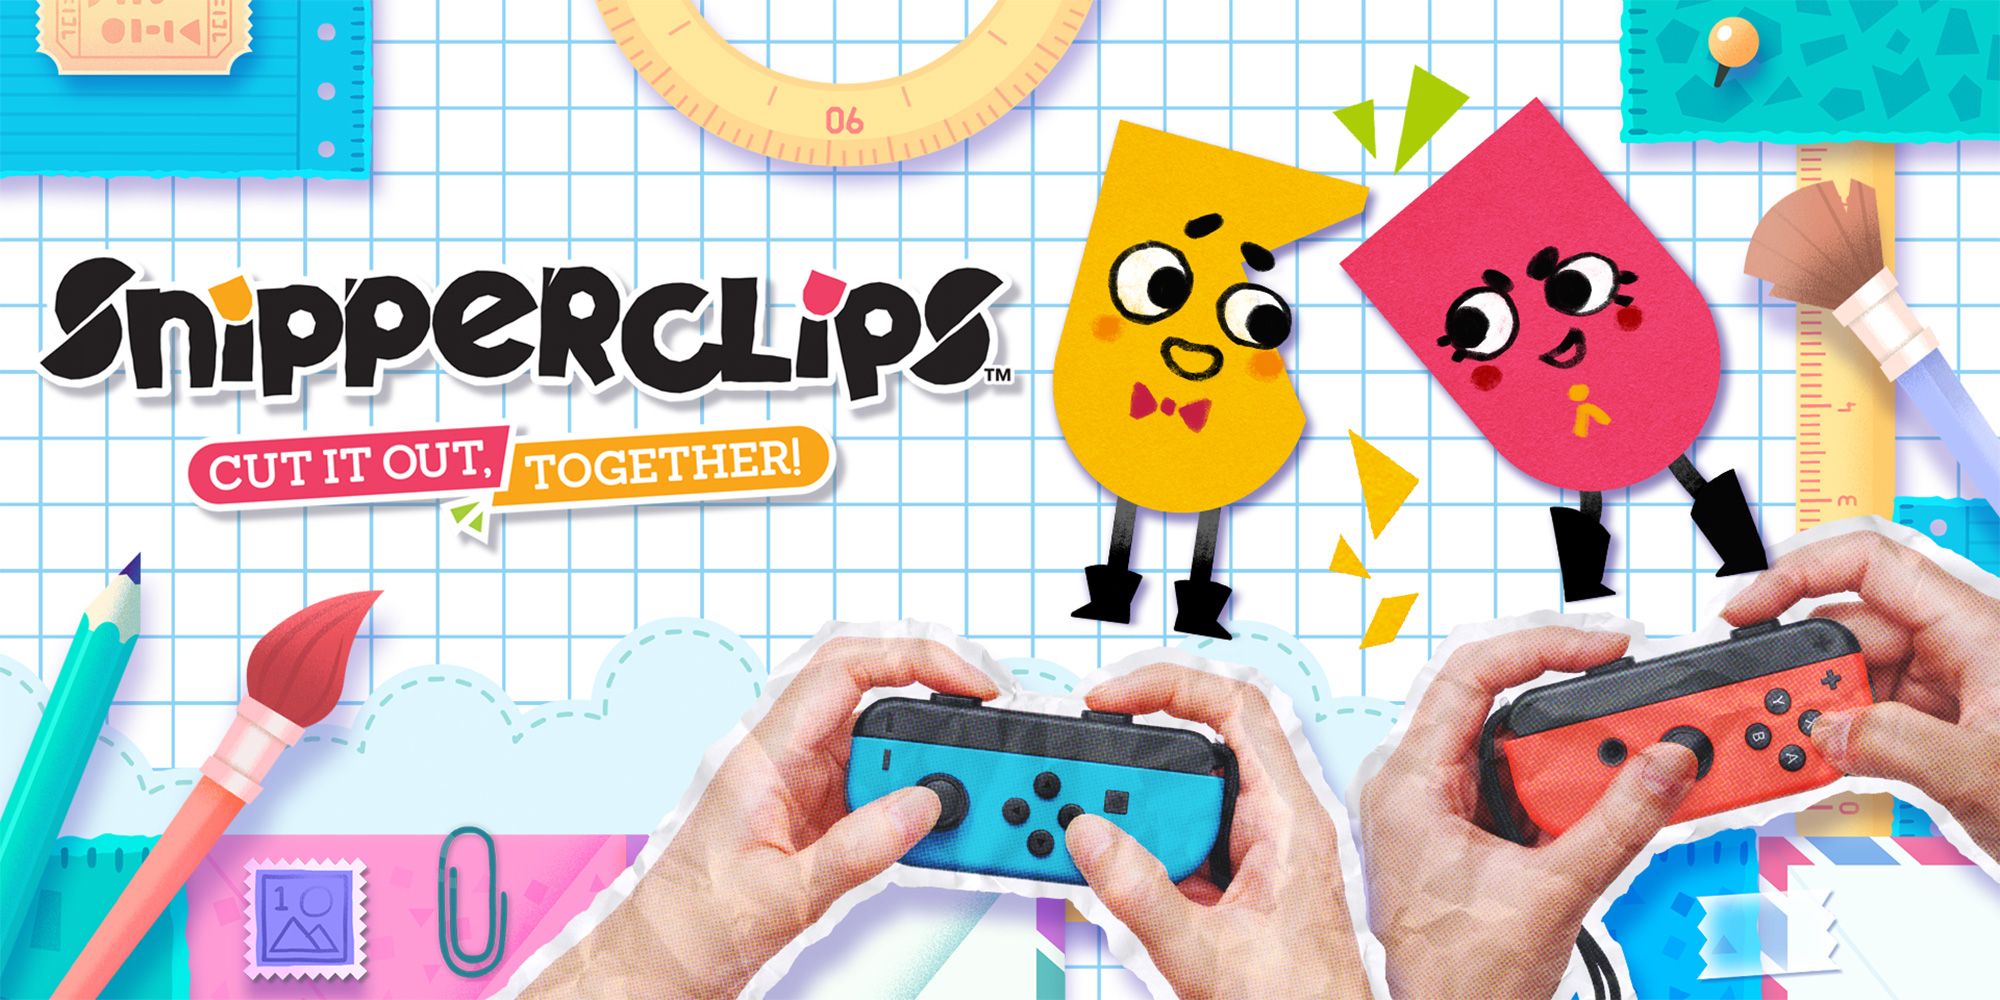 Snipperclips cover art/poster